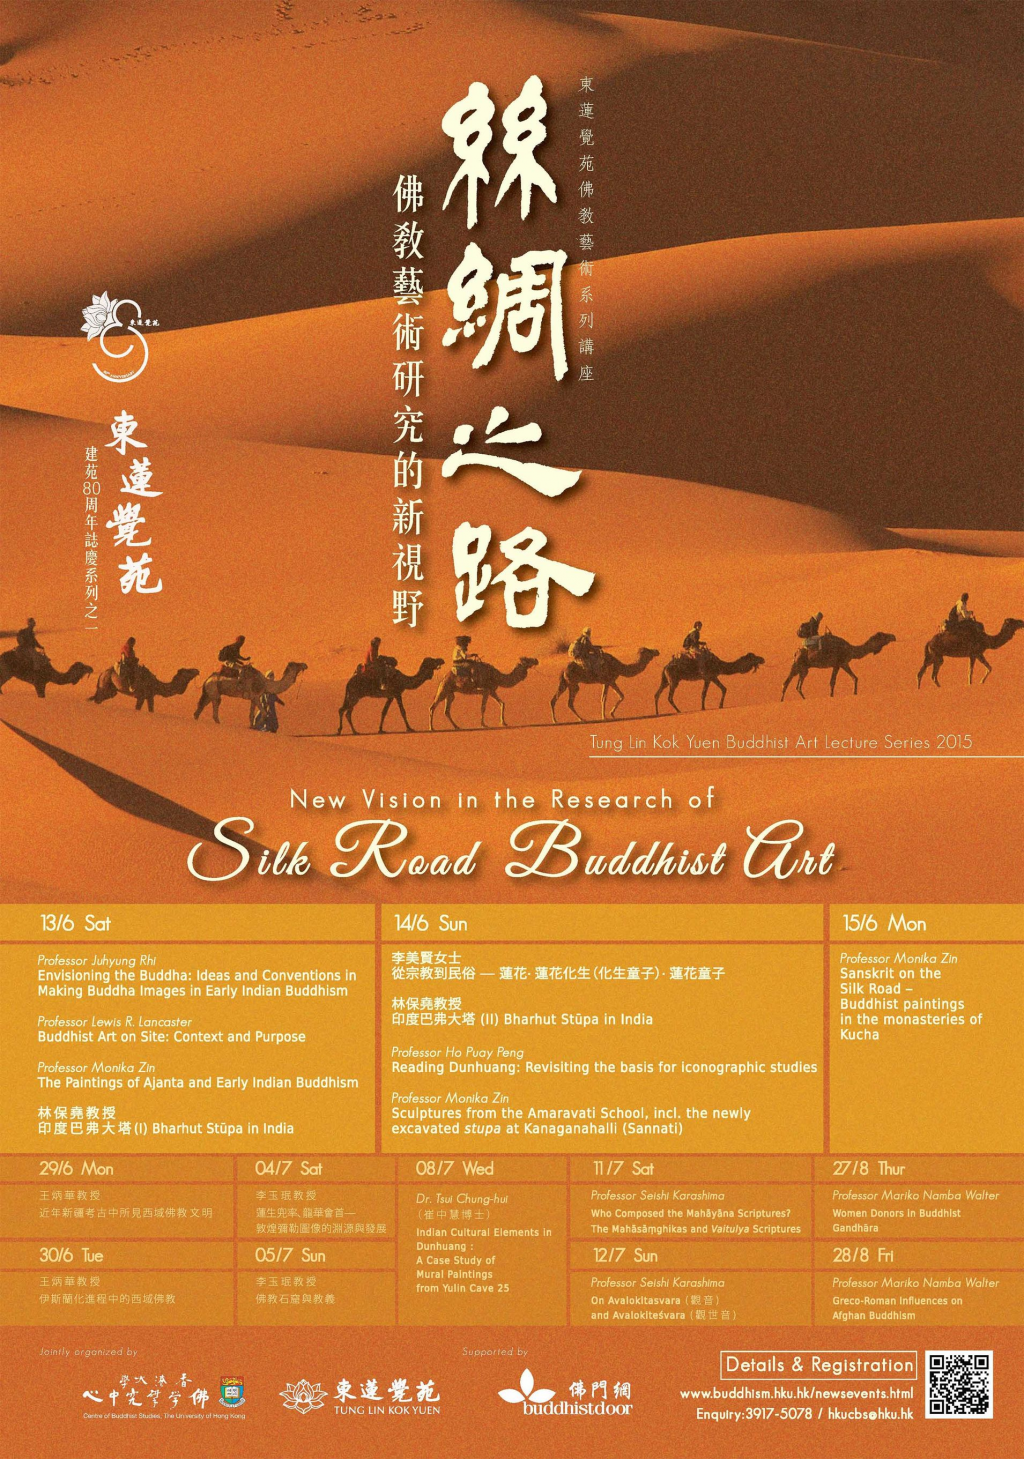 Tung Lin Kok Yuen Buddhist Art Lecture Series 2015 - New Vision in the Research of Silk Road Buddhist Art